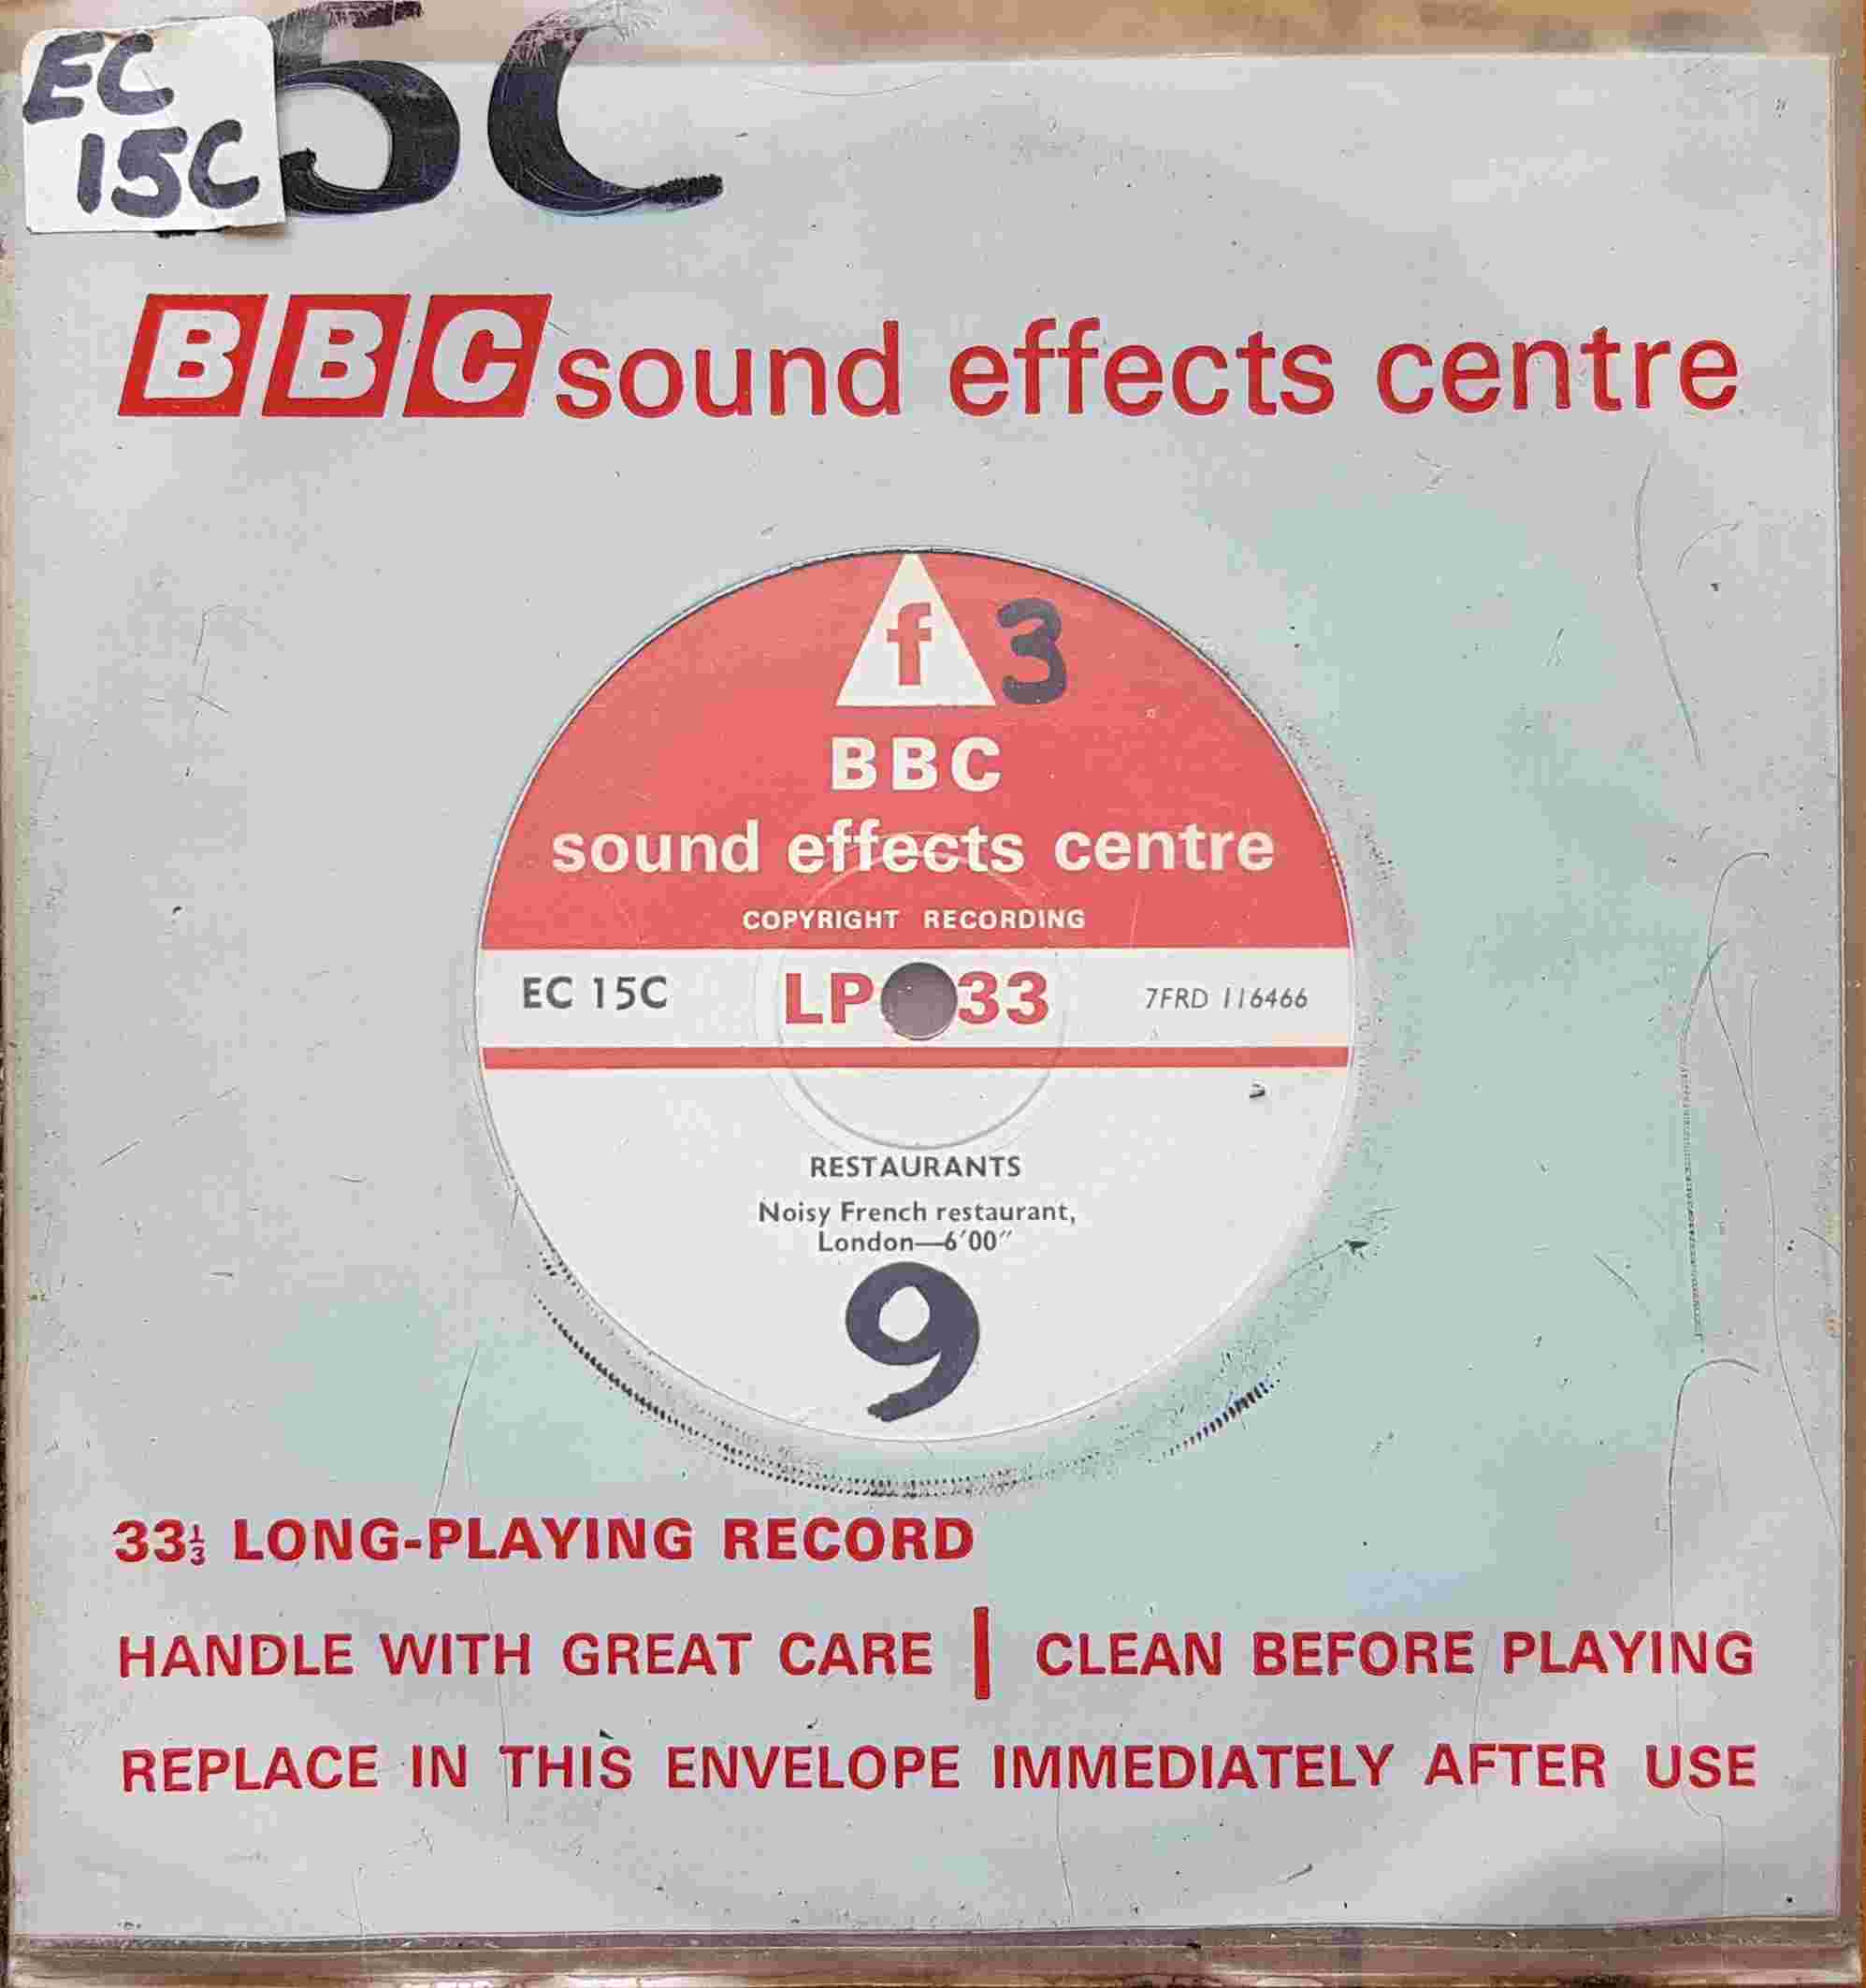 Picture of EC 15C Restaurants by artist Not registered from the BBC records and Tapes library